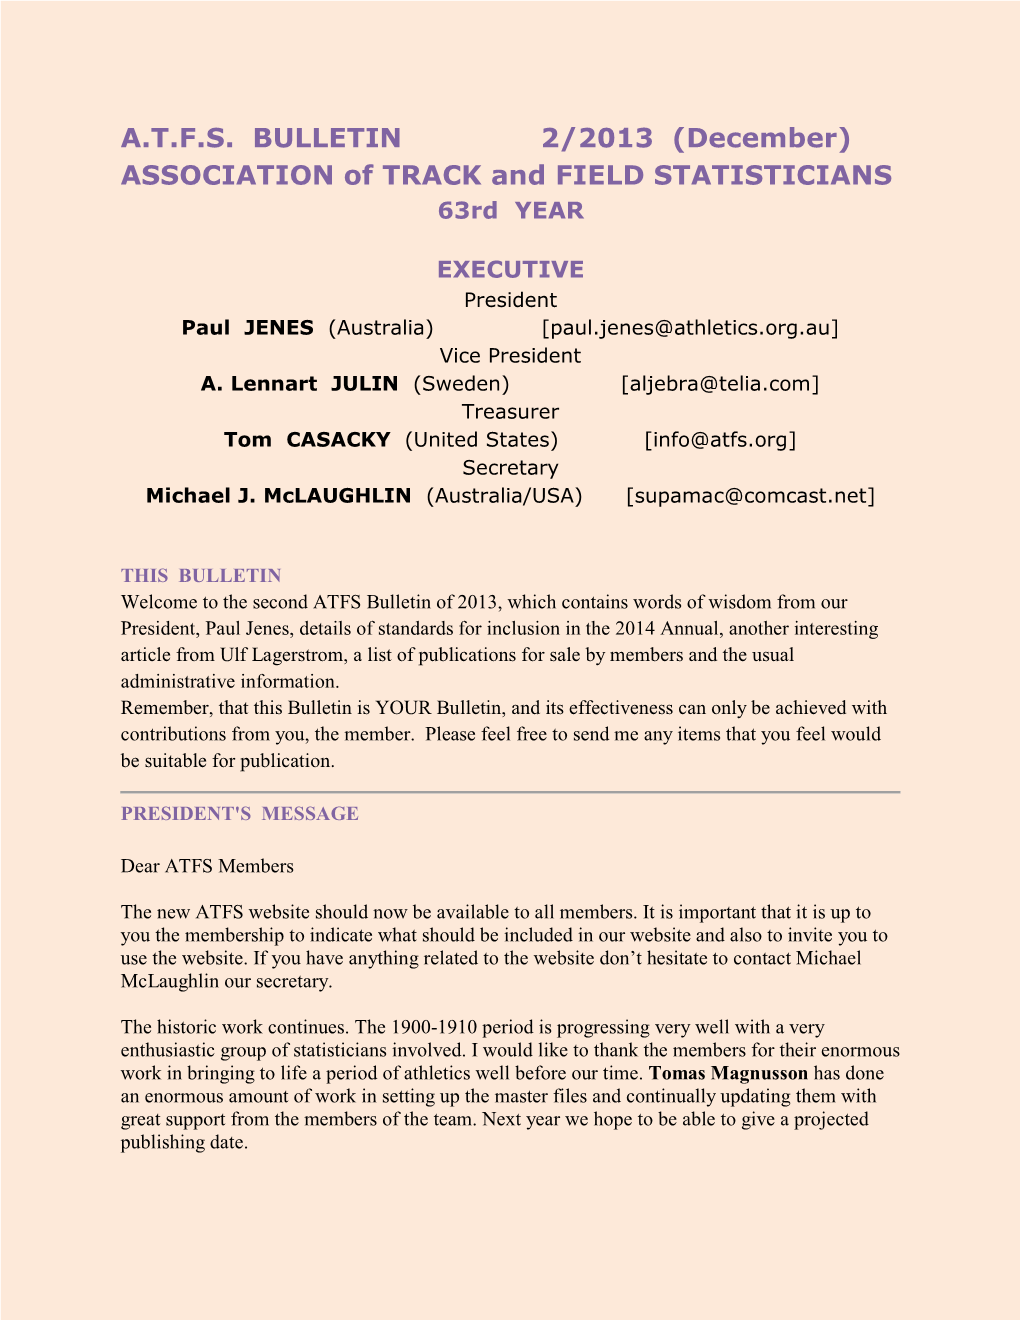 A.T.F.S. BULLETIN 2/2013 (December) ASSOCIATION of TRACK and FIELD STATISTICIANS 63Rd YEAR